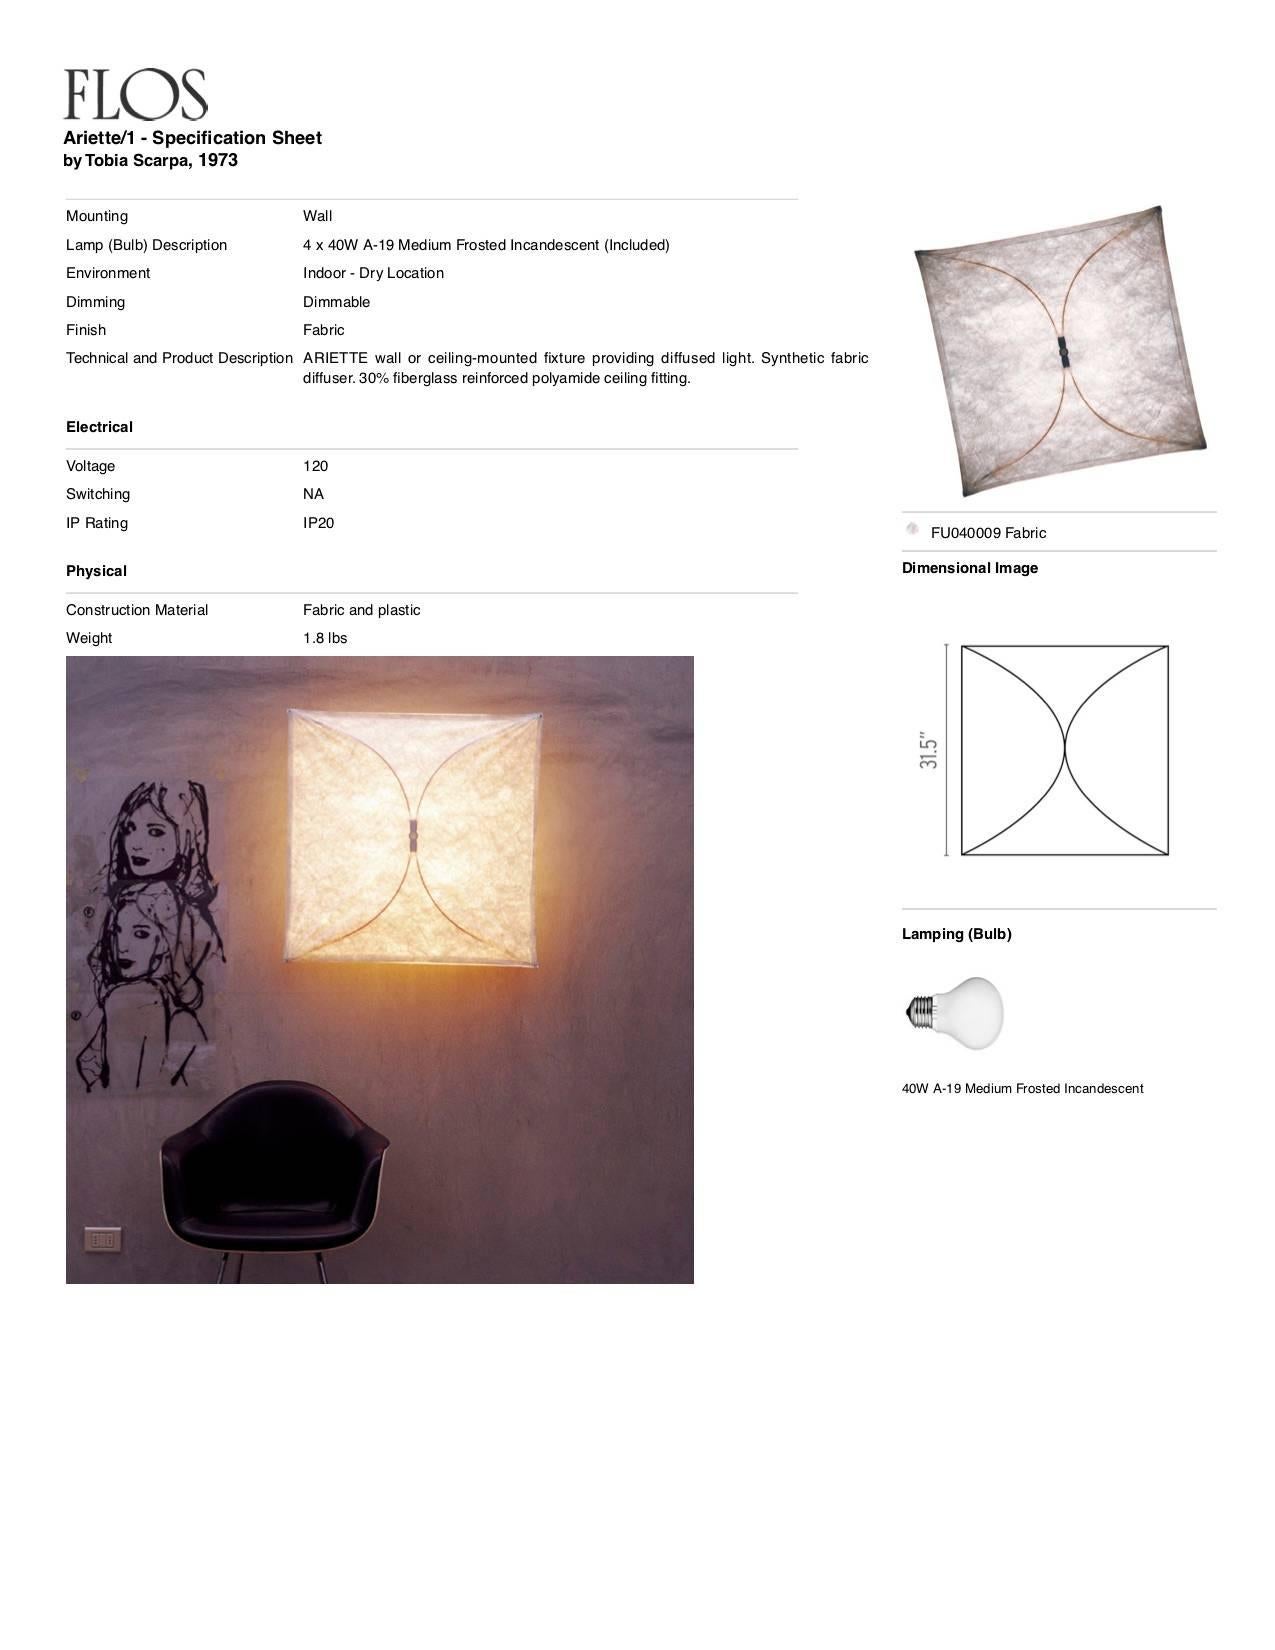 FLOS Ariette 1 Small Dimmable Wall Lamp by Tobia Scarpa In New Condition For Sale In Brooklyn, NY